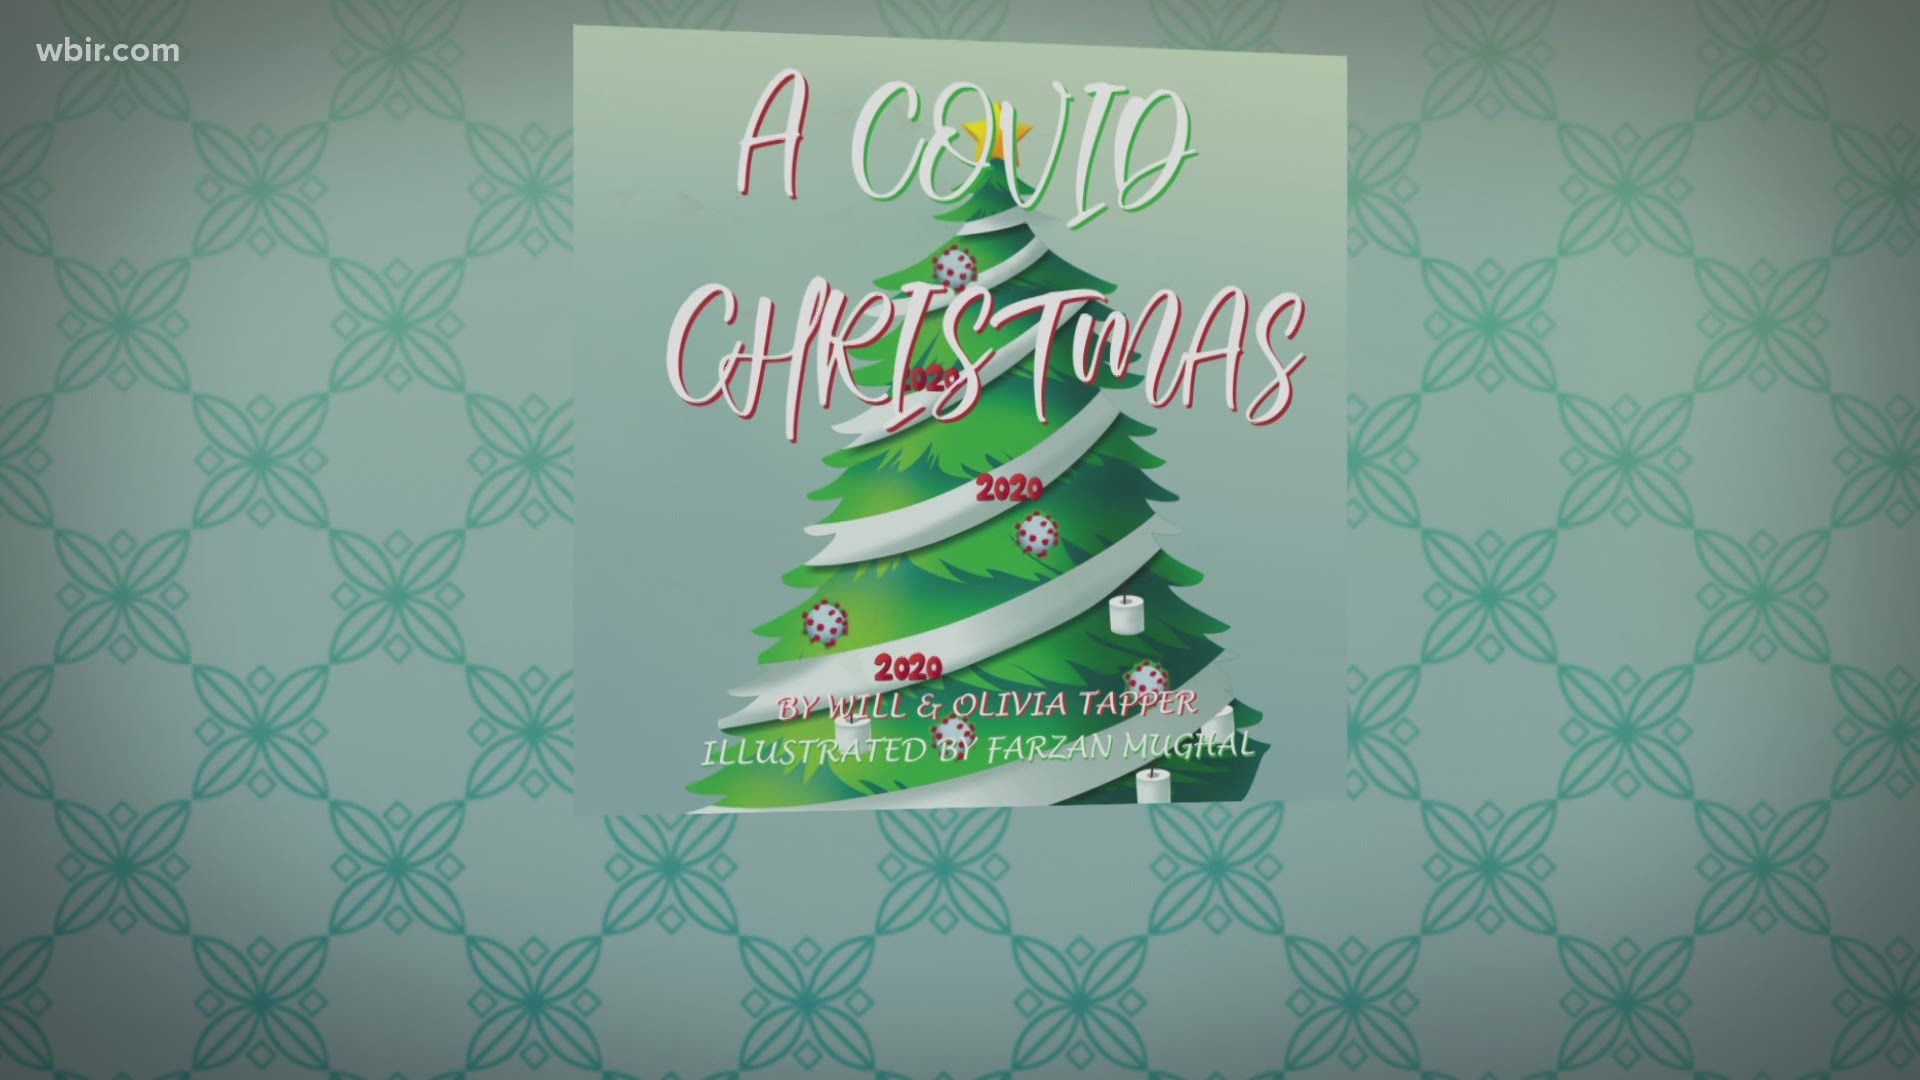 Channel 10's own Will Tapper and his wife collaborated to create a children's book about COVID and Christmas. It's available on Amazon. Dec. 10, 20204-pm.